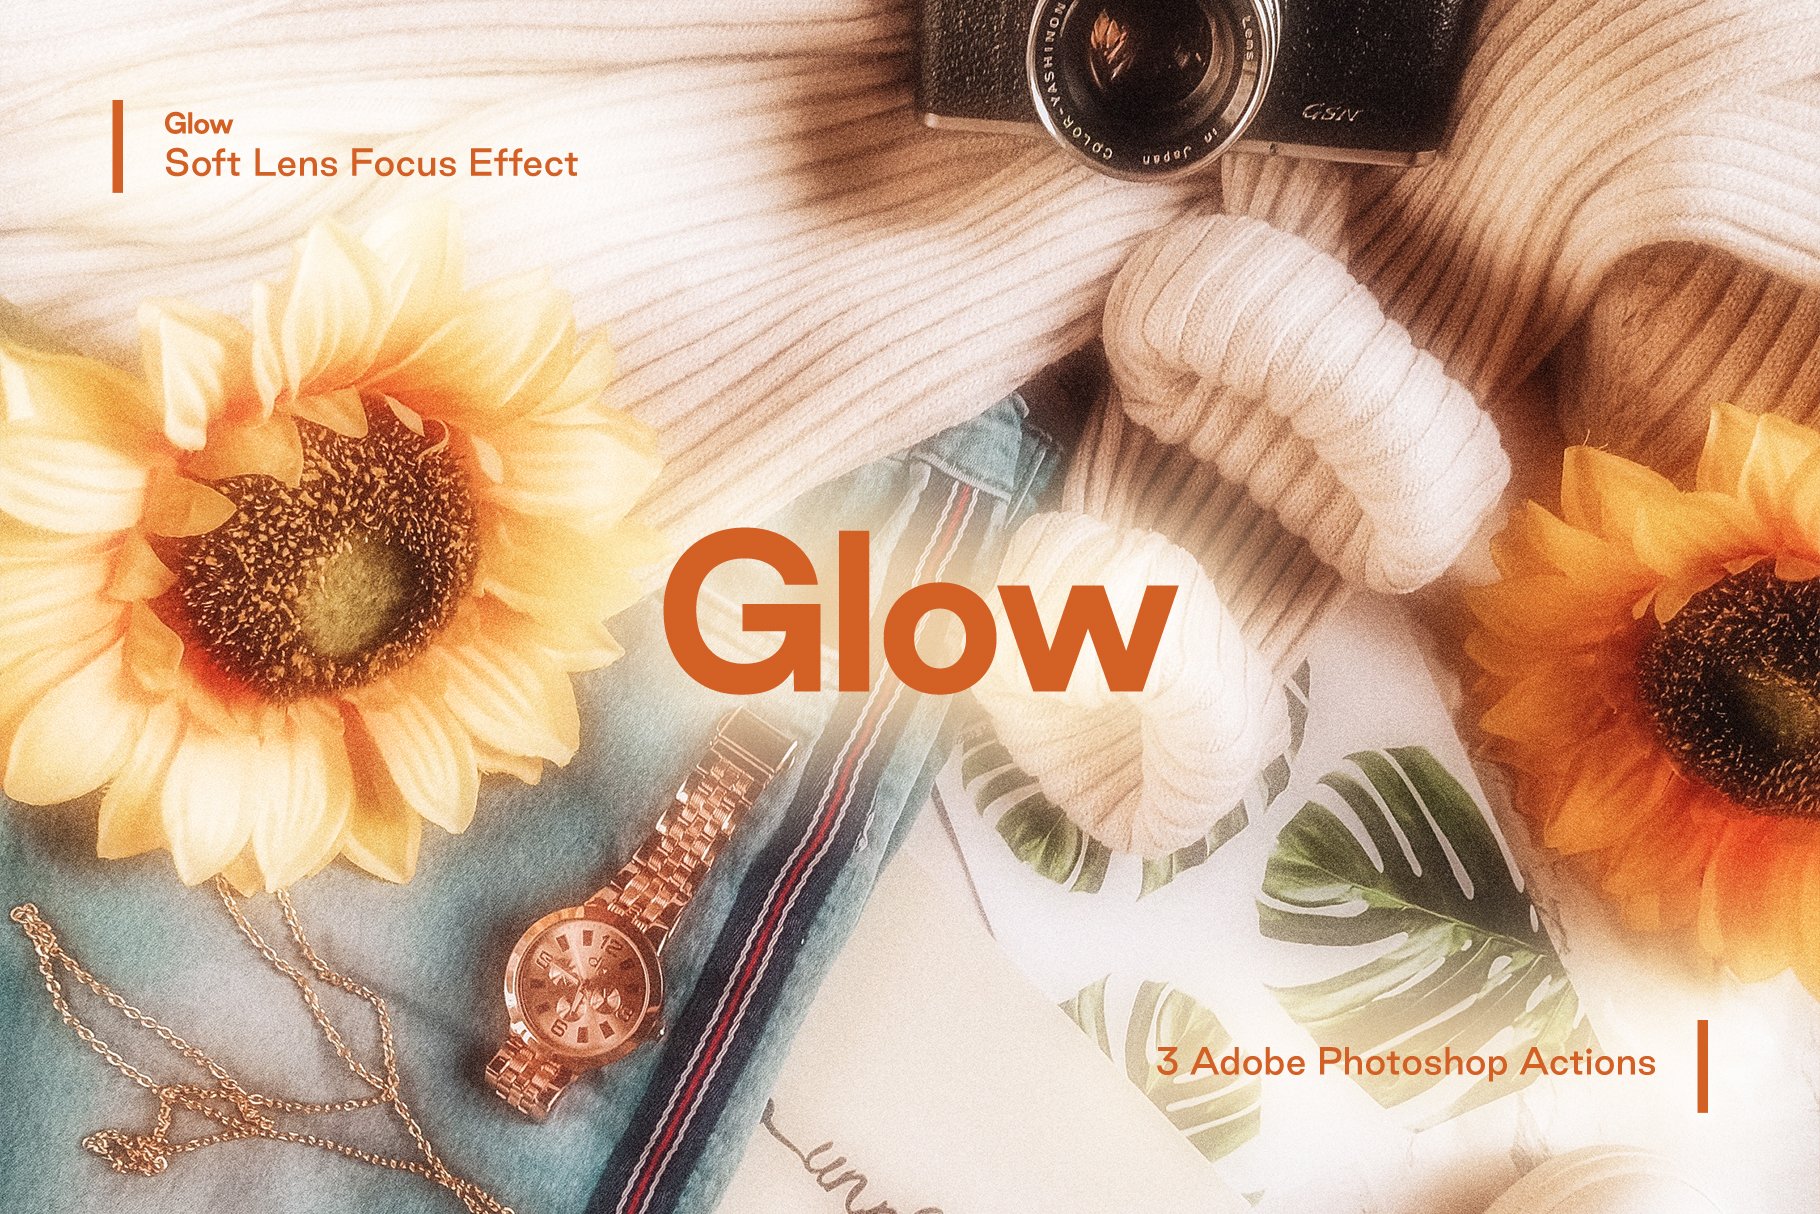 Glow - Soft Lens Focus Actioncover image.